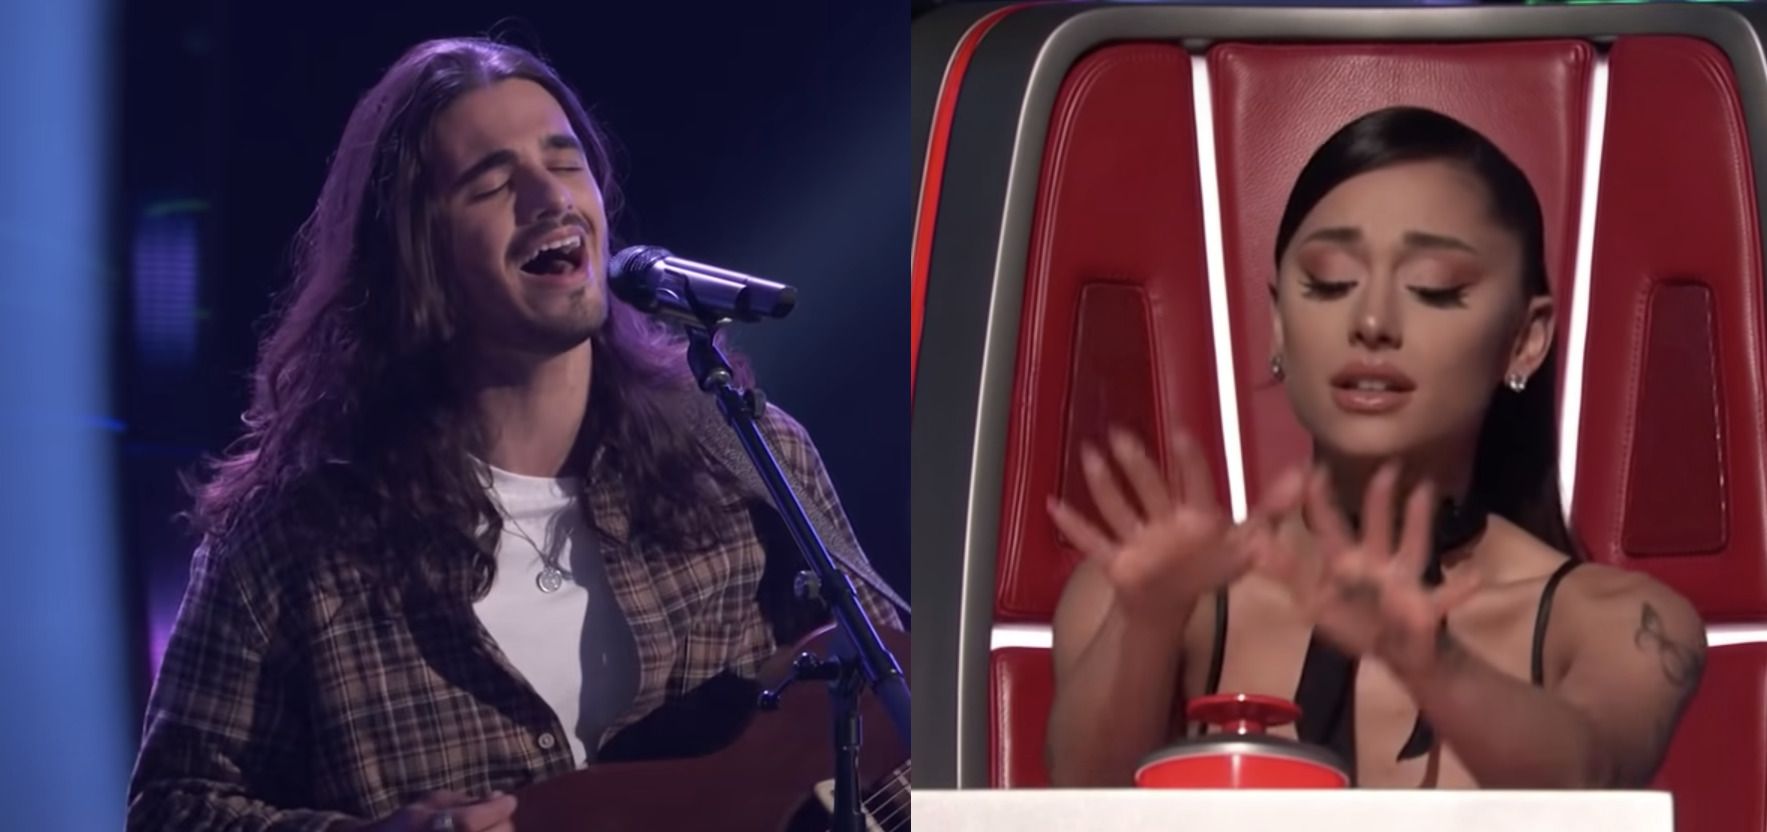 Ariana Grande's Winning The Voice Style Includes a Vintage Score